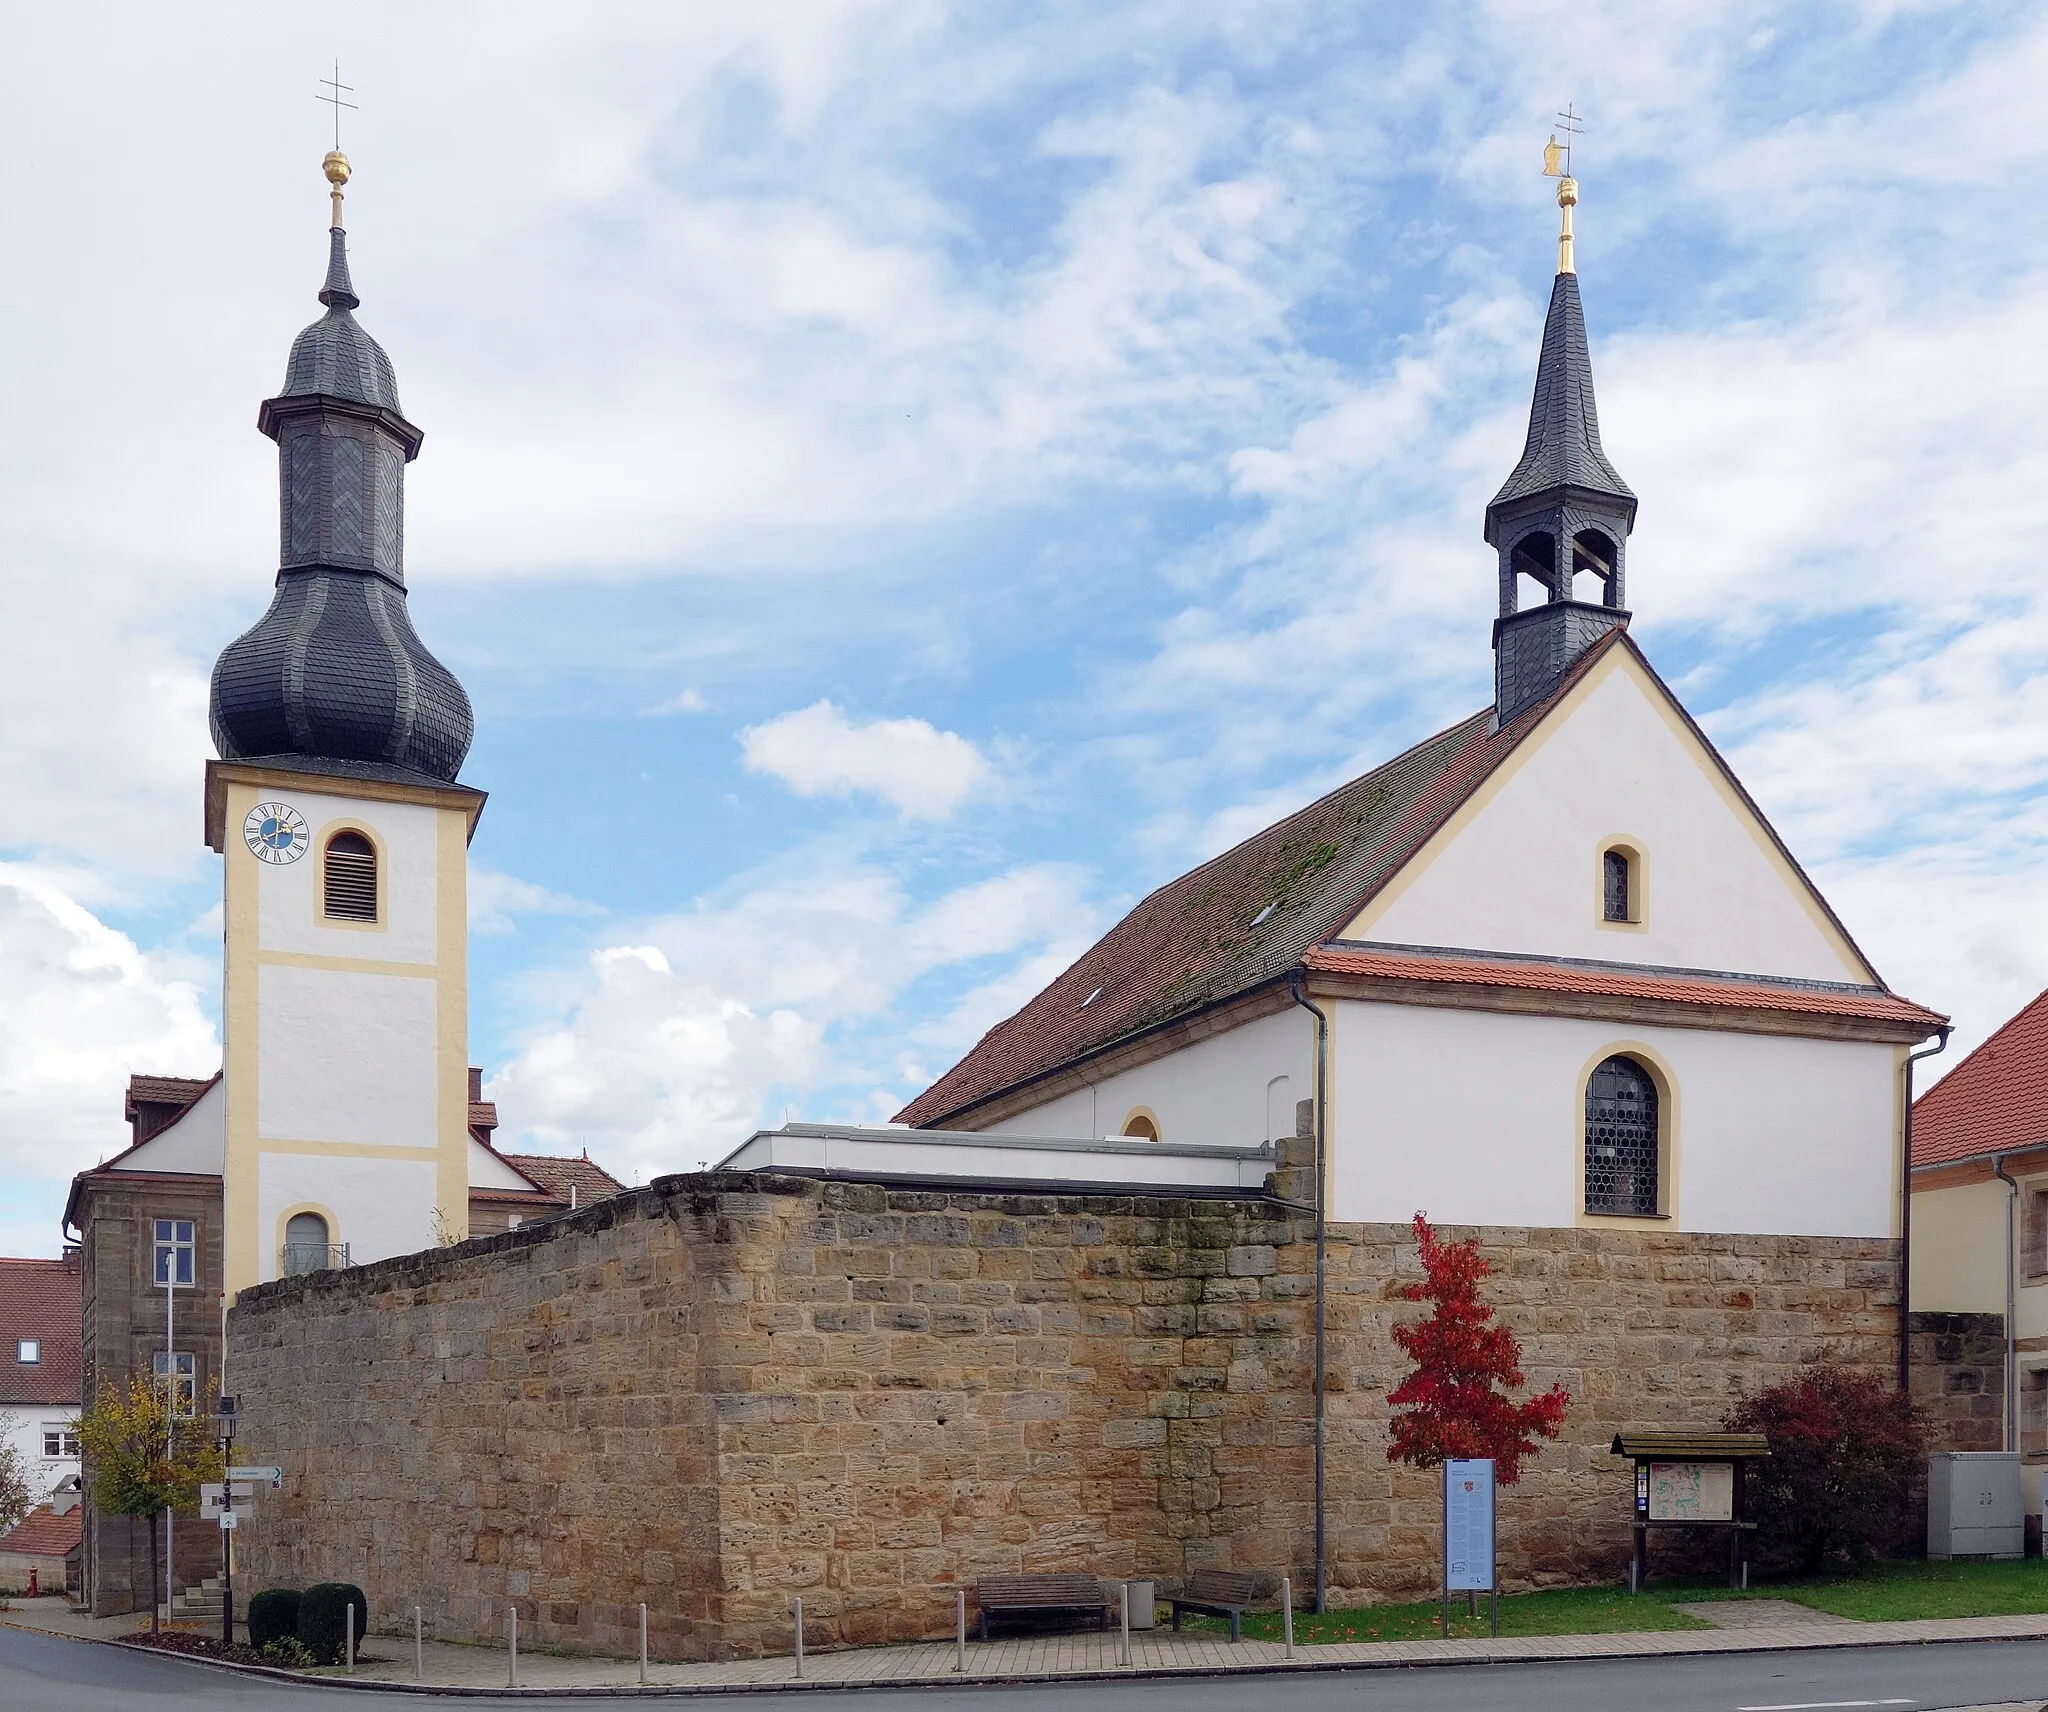 Photo showing: The church St. Nikolaus in Pinzberg, a town in northern Bavaria.